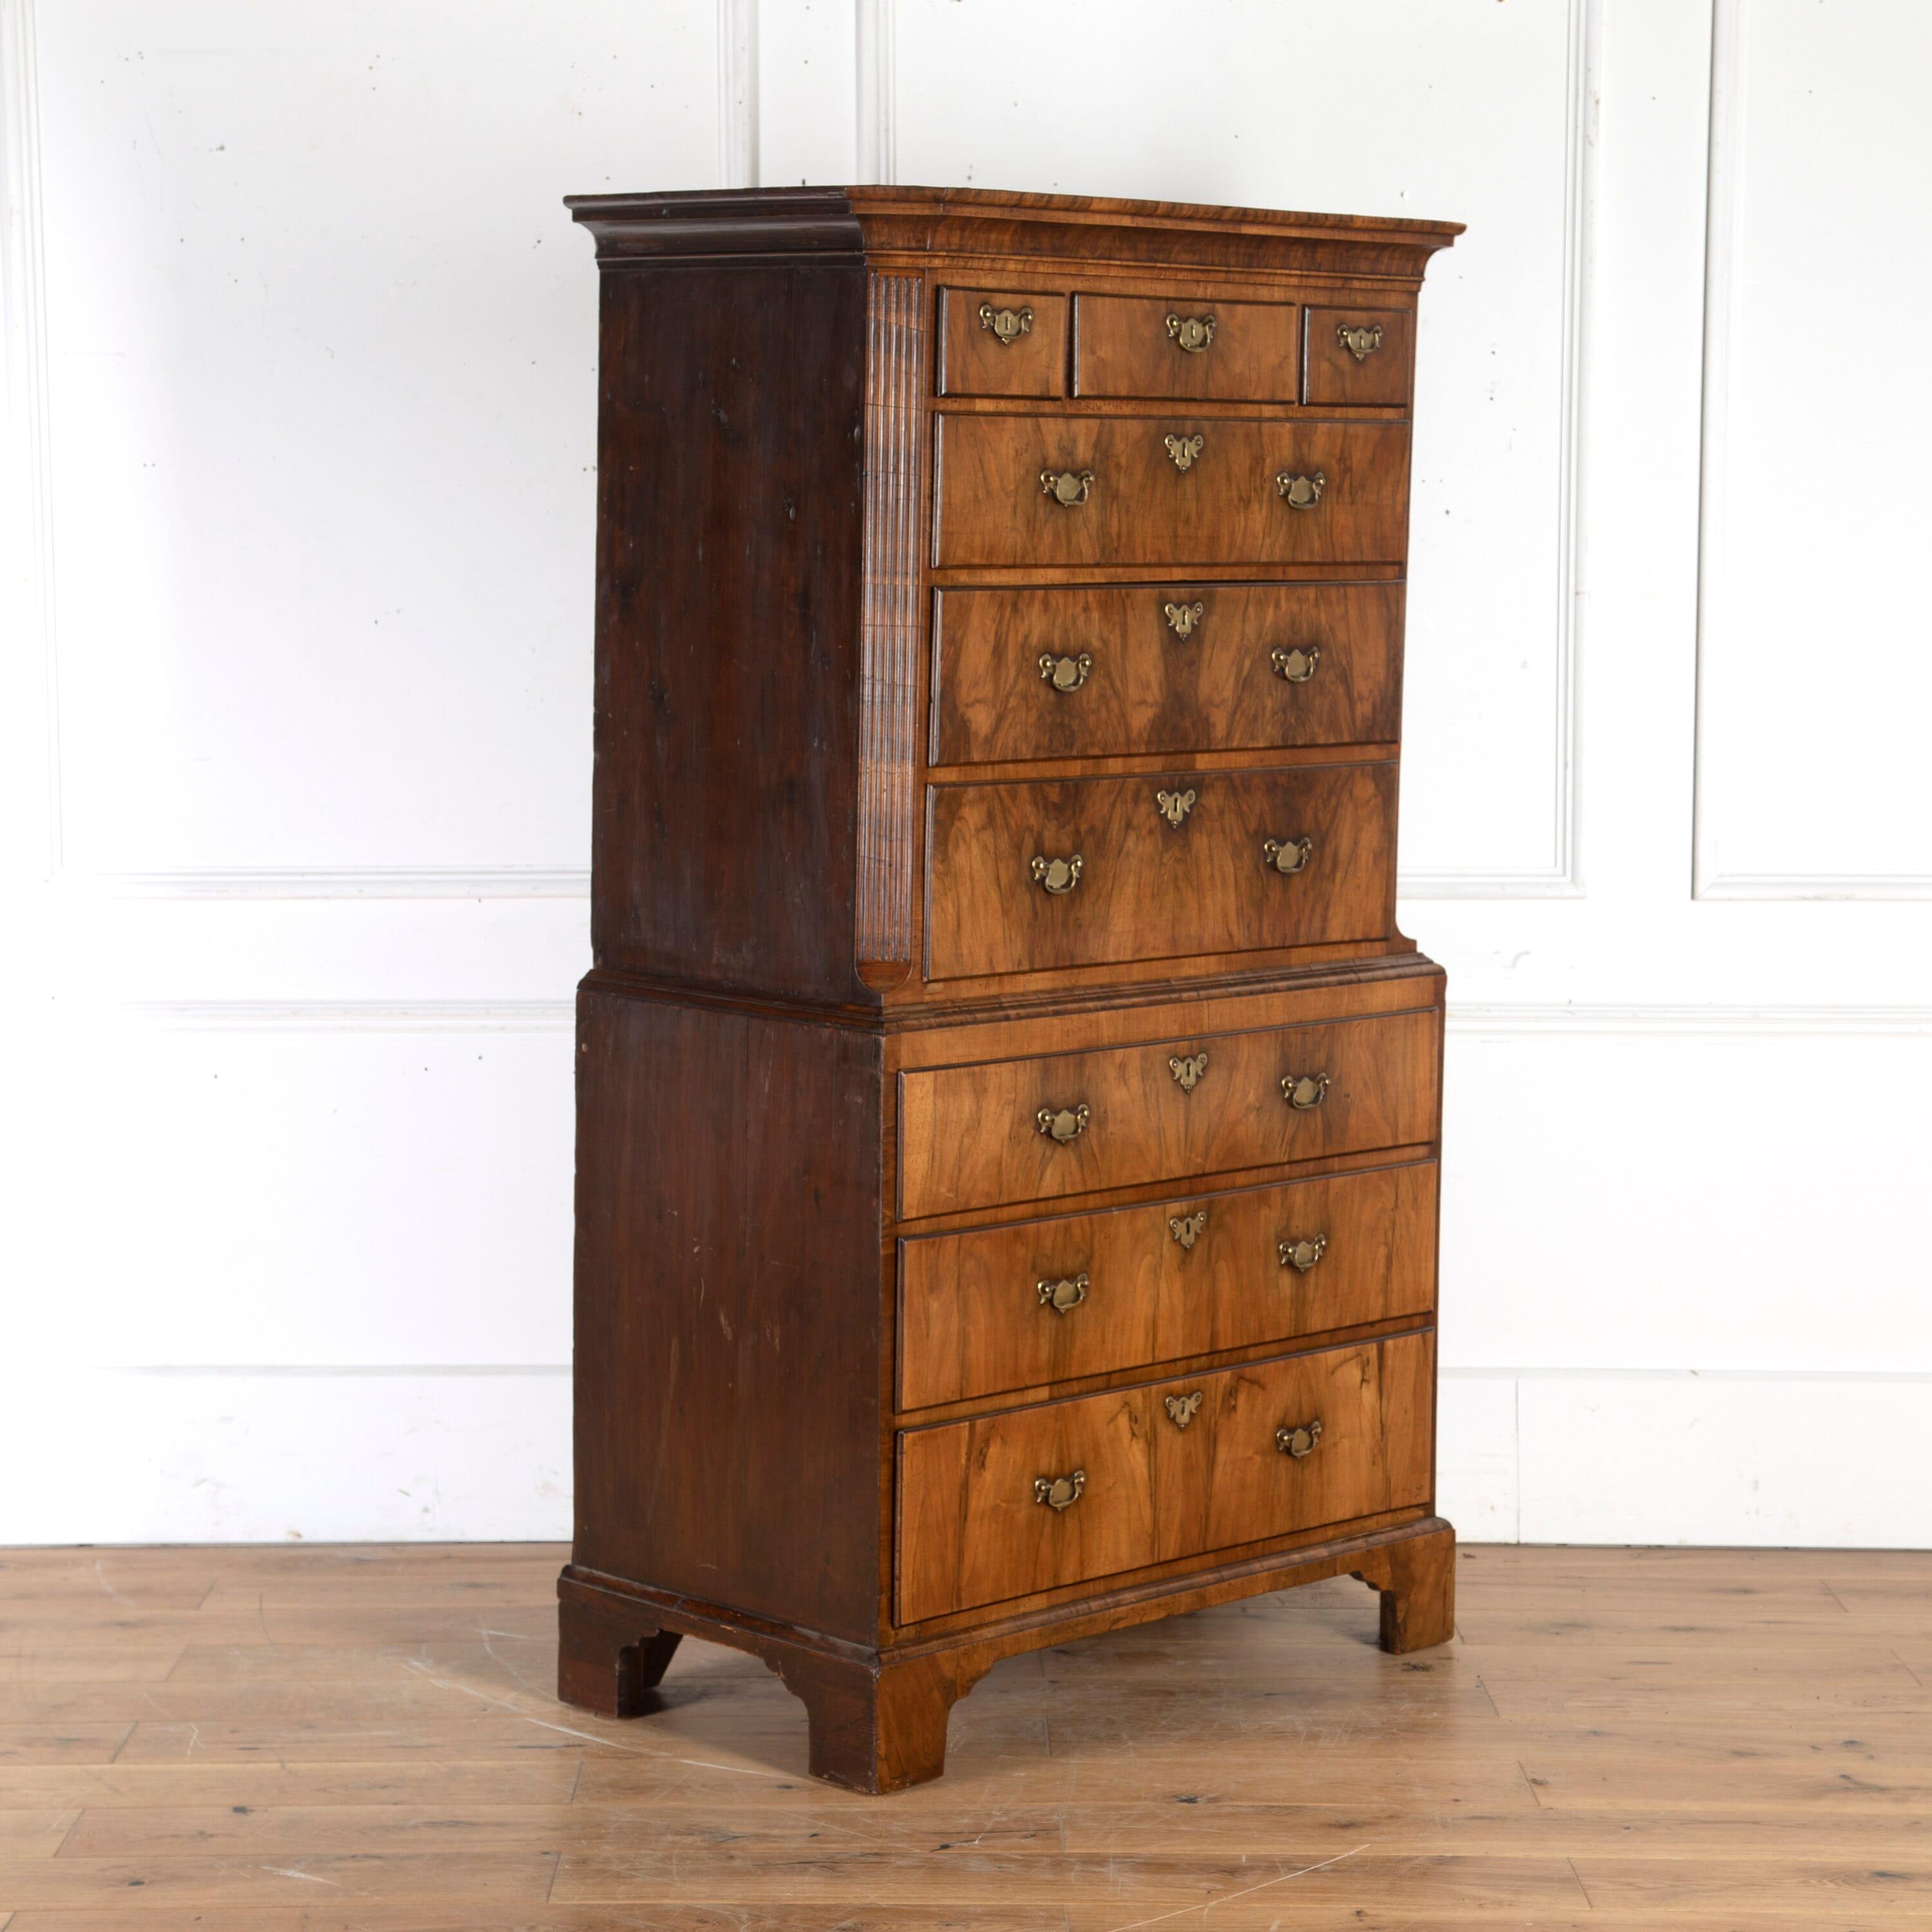 Wonderful late 18th century chest on chest.

This piece is in walnut with pine sides. It has excellent proportions; the top section offers three small drawers above three longer graduated ones, and there are three further graduated drawers to the